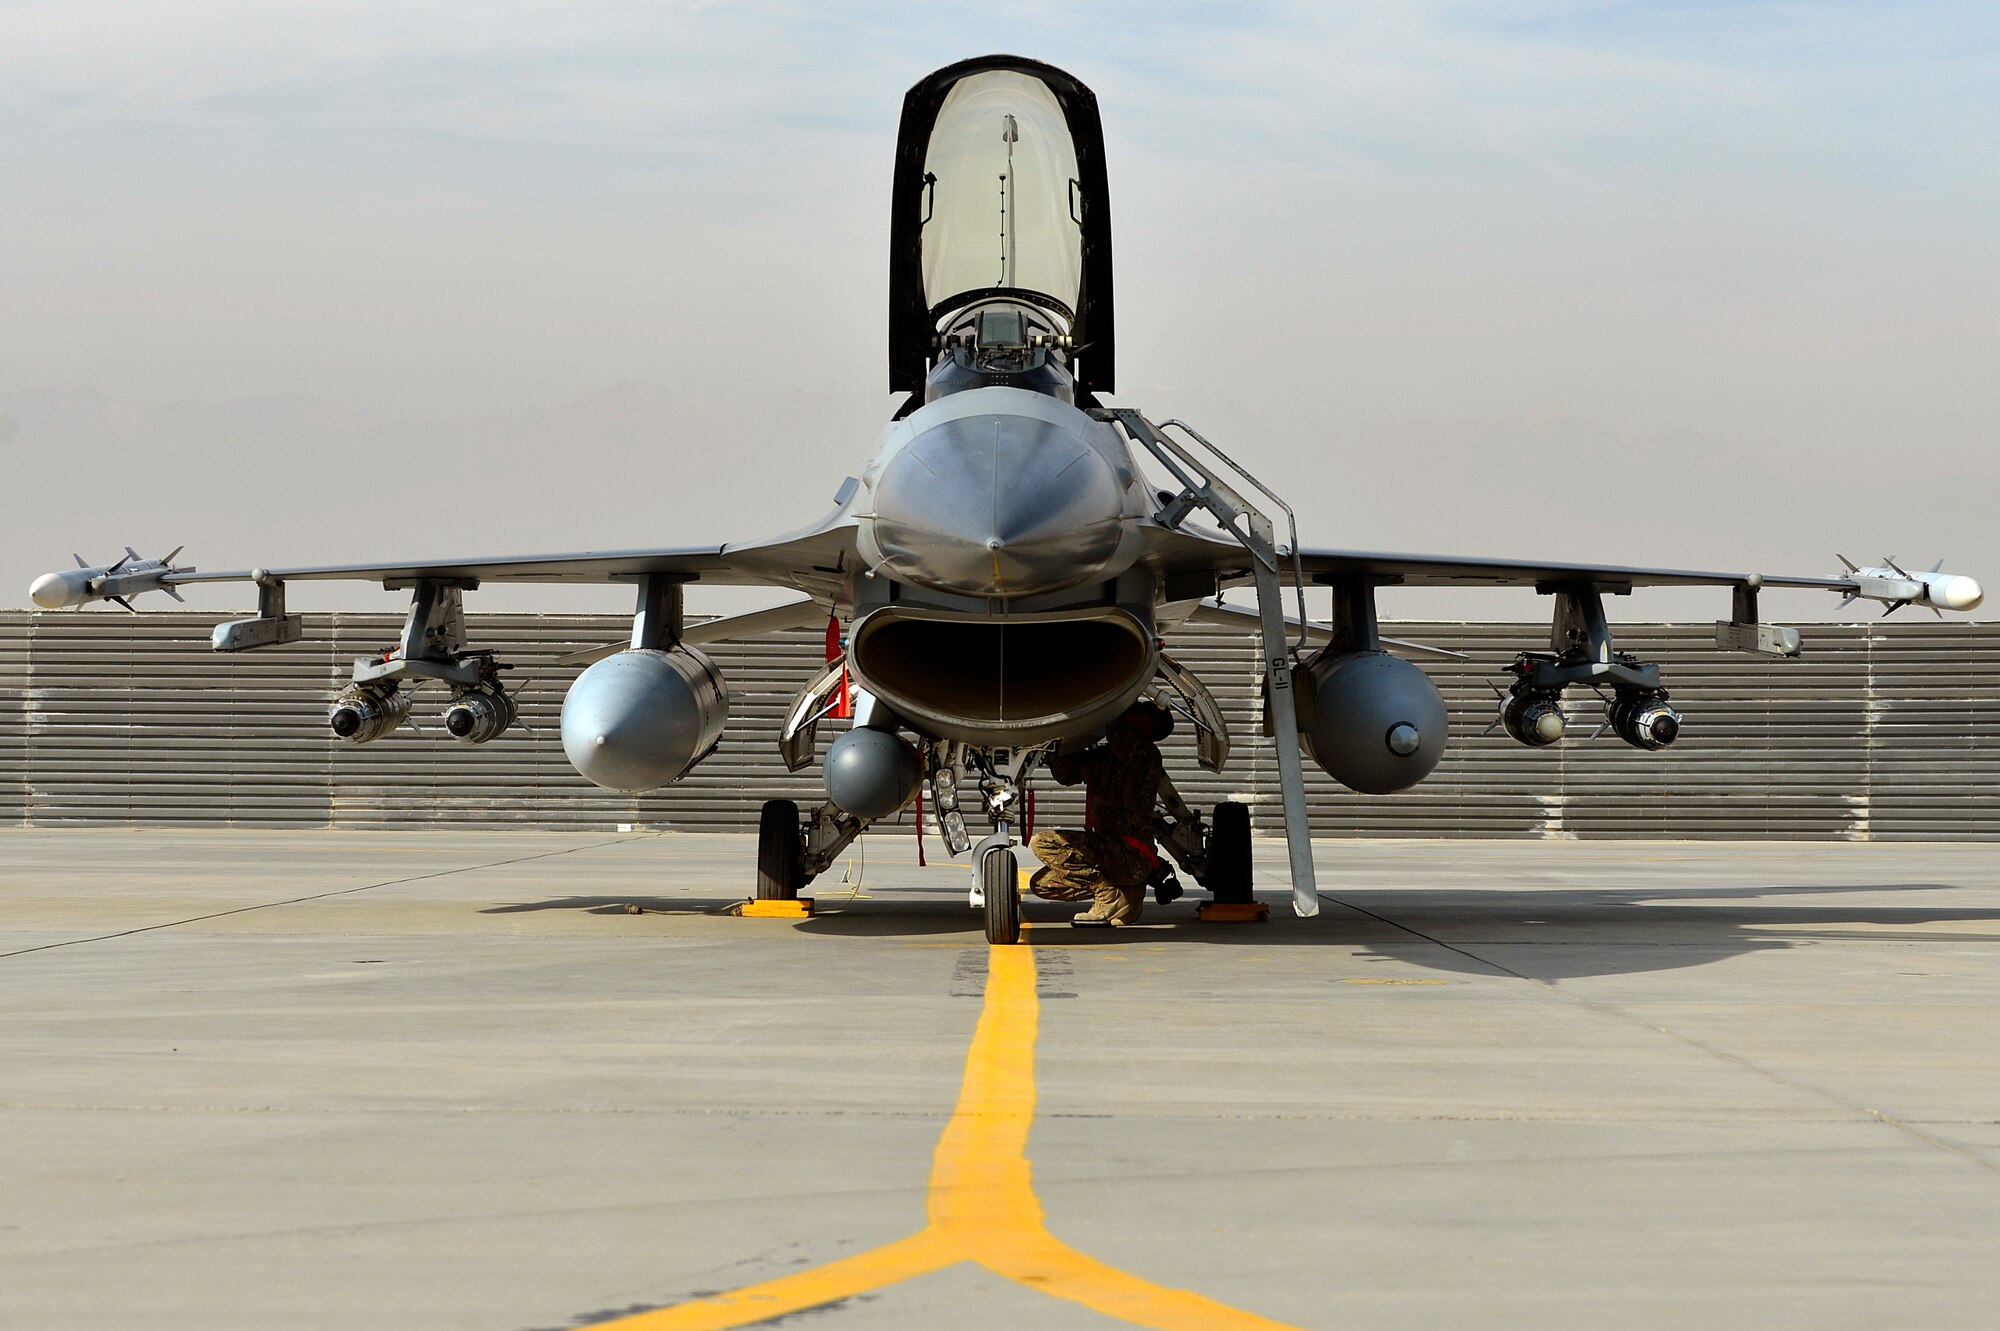 A newly arrived F-16 Fighting Falcon sits on the flightline at Bagram Airfield, Afghanistan, Dec. 15, 2013. The F-16s transitioned from Kandahar Airfield, Afghanistan, to Bagram once the main runway was renovated. (U.S. Air Force photo by Senior Airman Kayla Newman/Released)